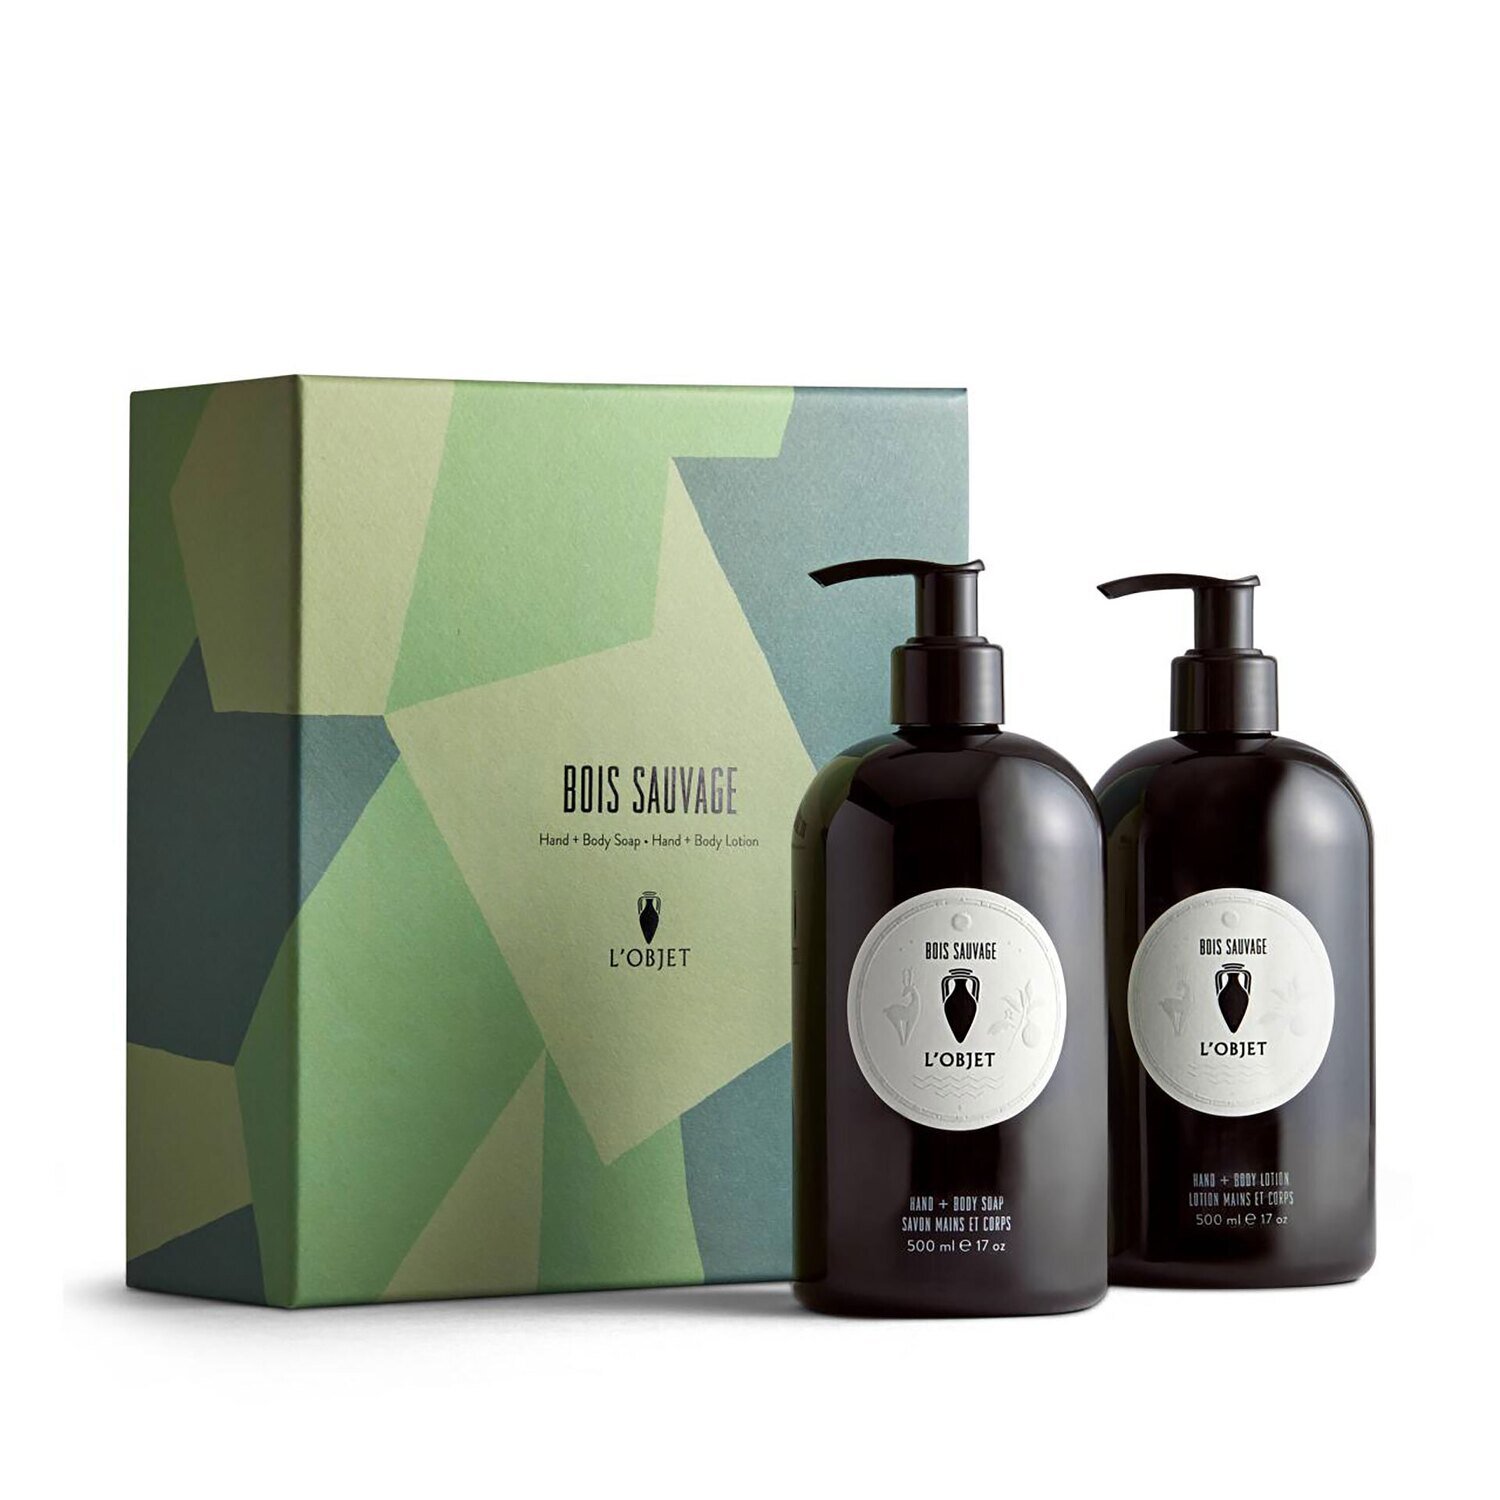 L'Objet Bois Sauvage Hand and Body Soap With Lotion Gift Set AP4501